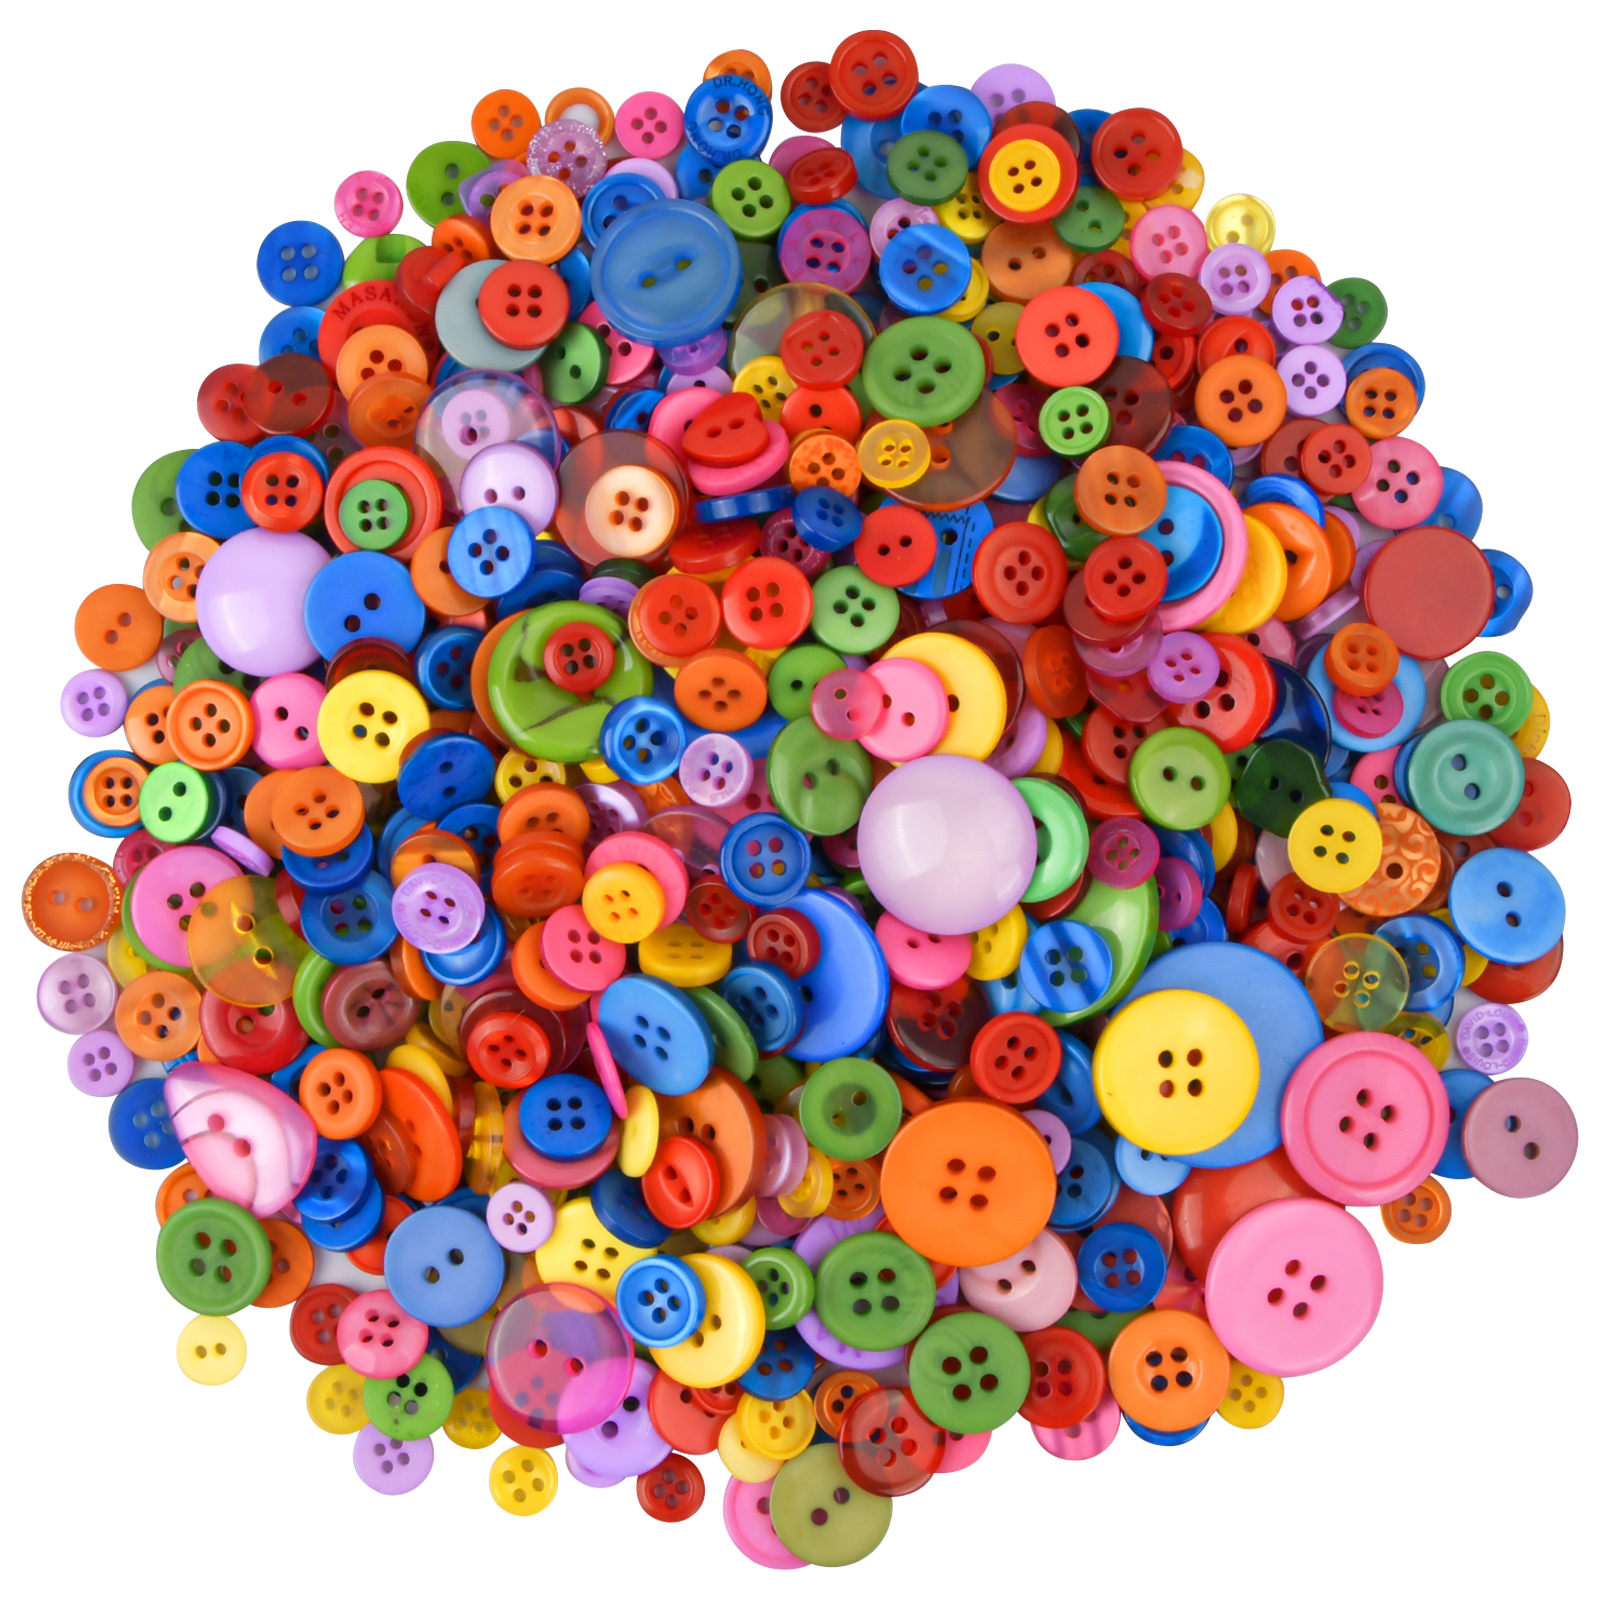 660pcs Buttons Mixed Resin Buttons Assorted Colorful Buttons Plastic Round  Ridge 2/4/6 Holes Sewing Buttons